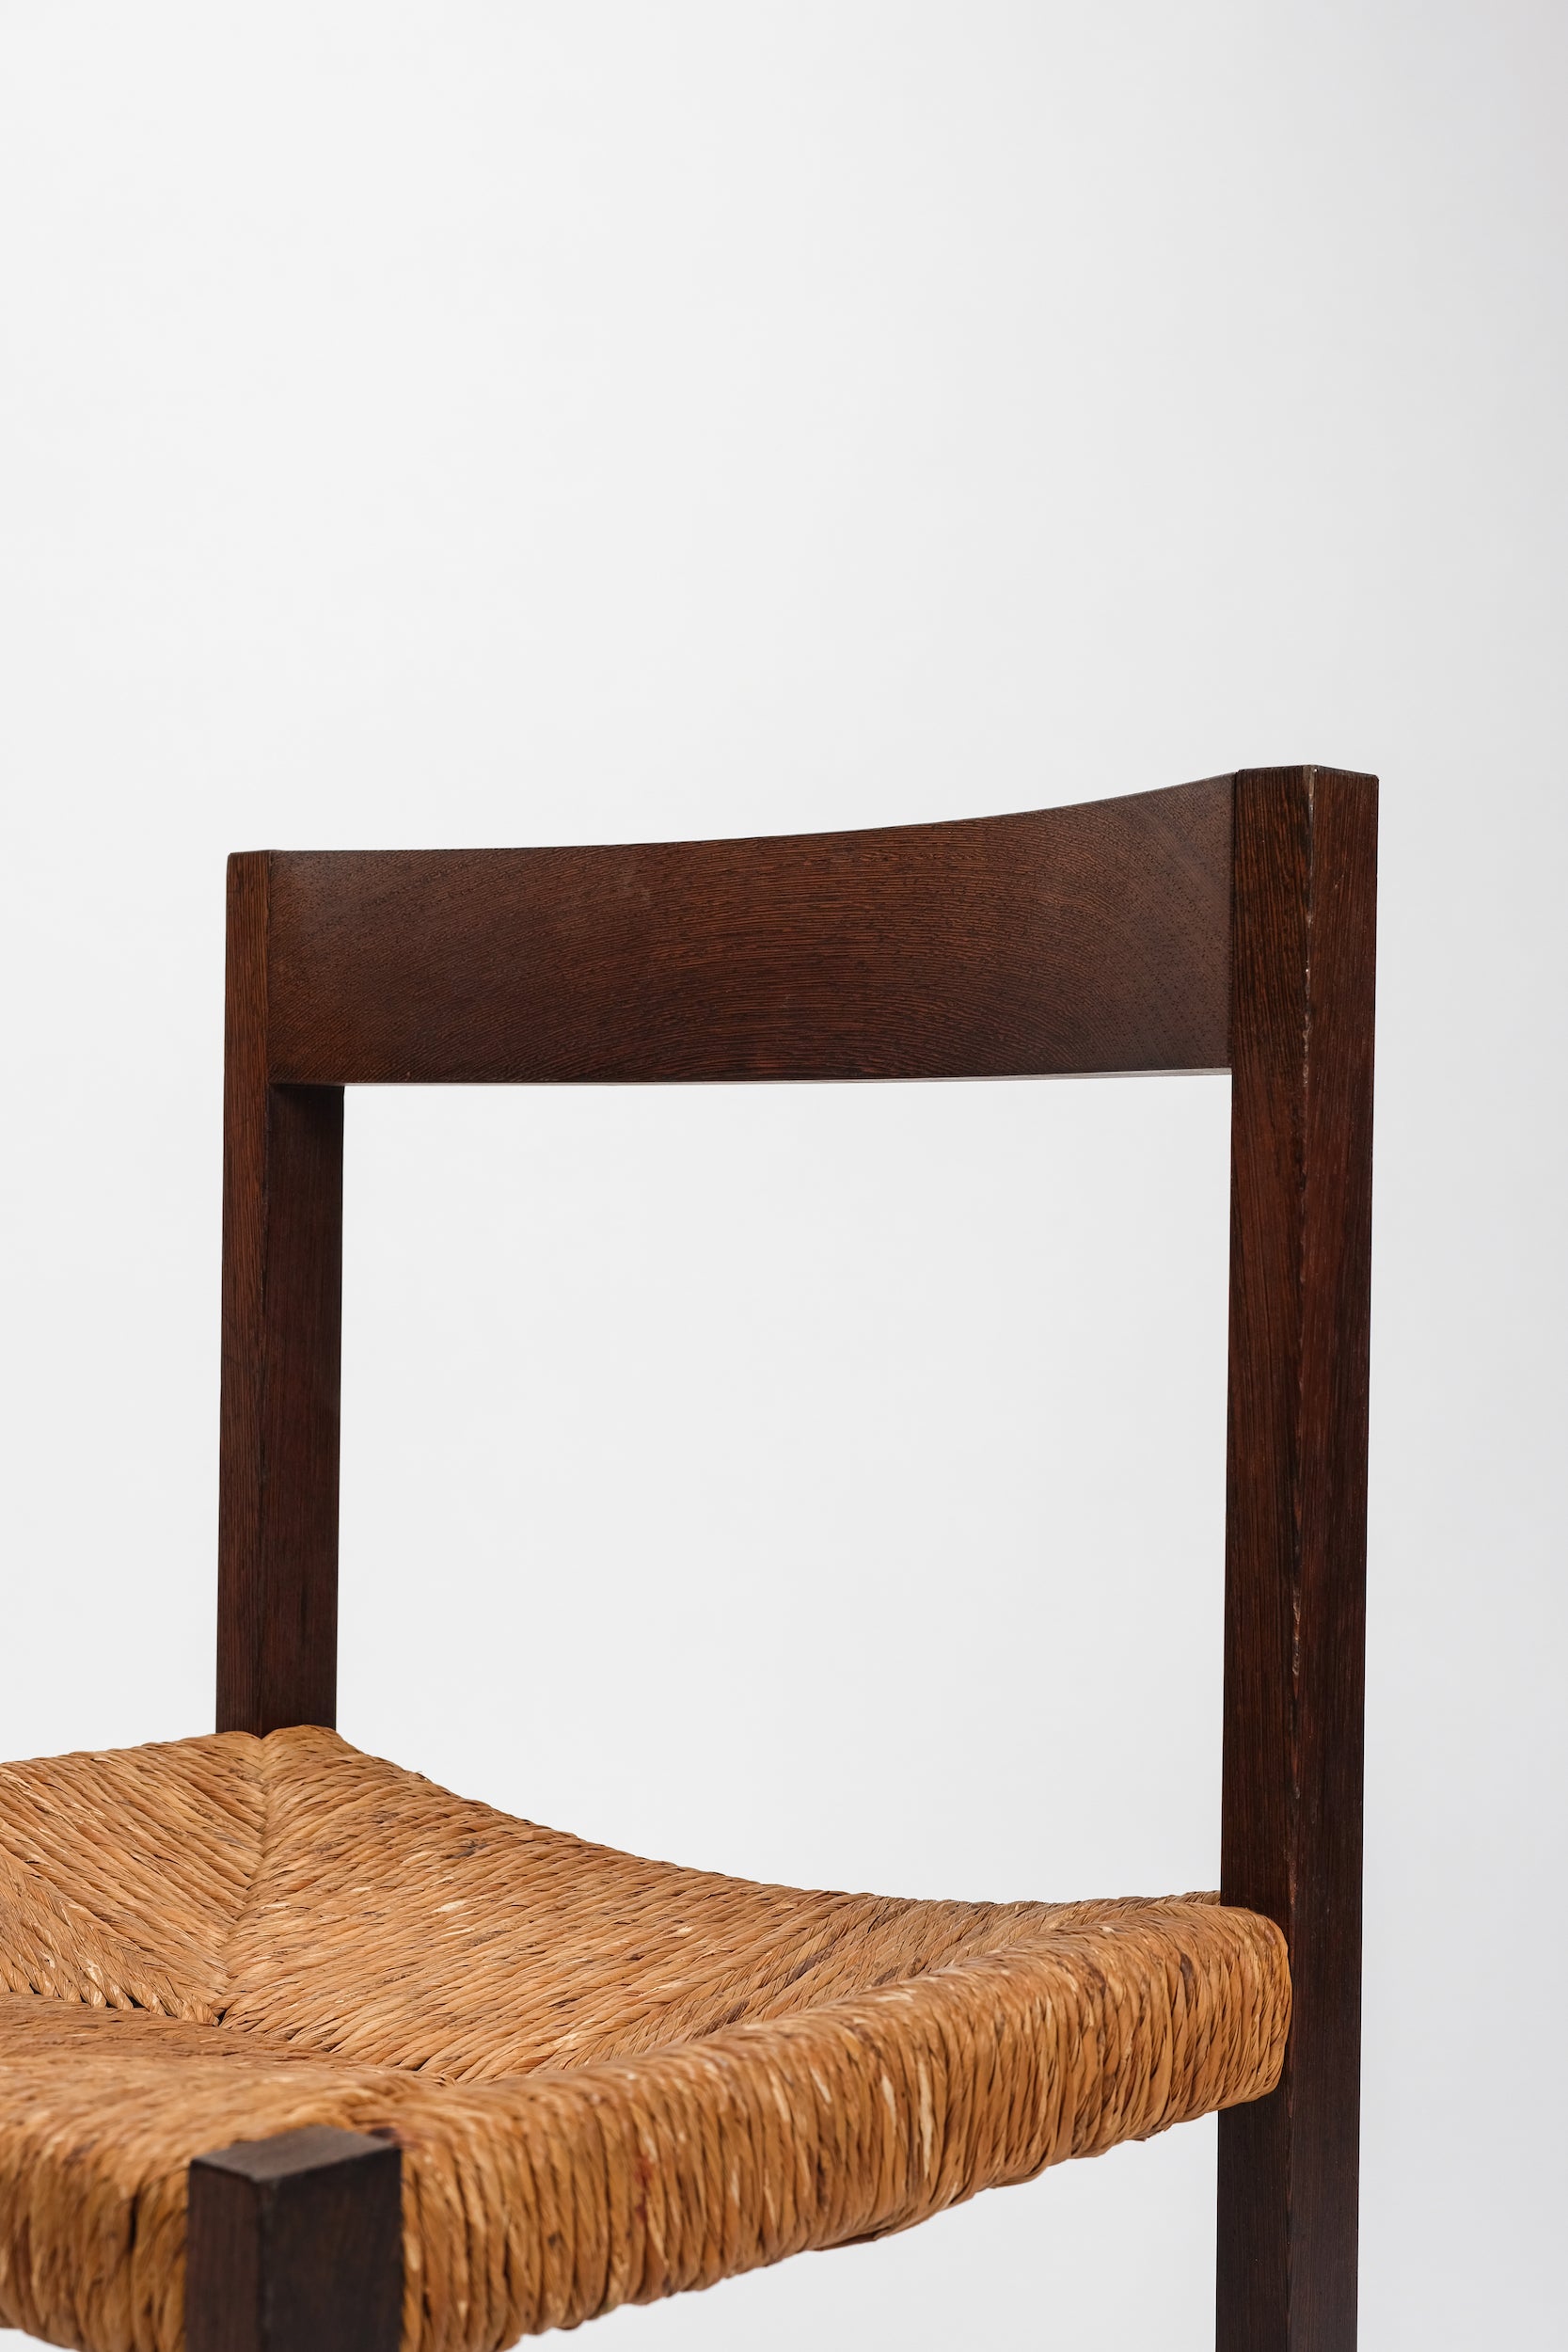 Chair, Wenge with Cord Covering, 70s